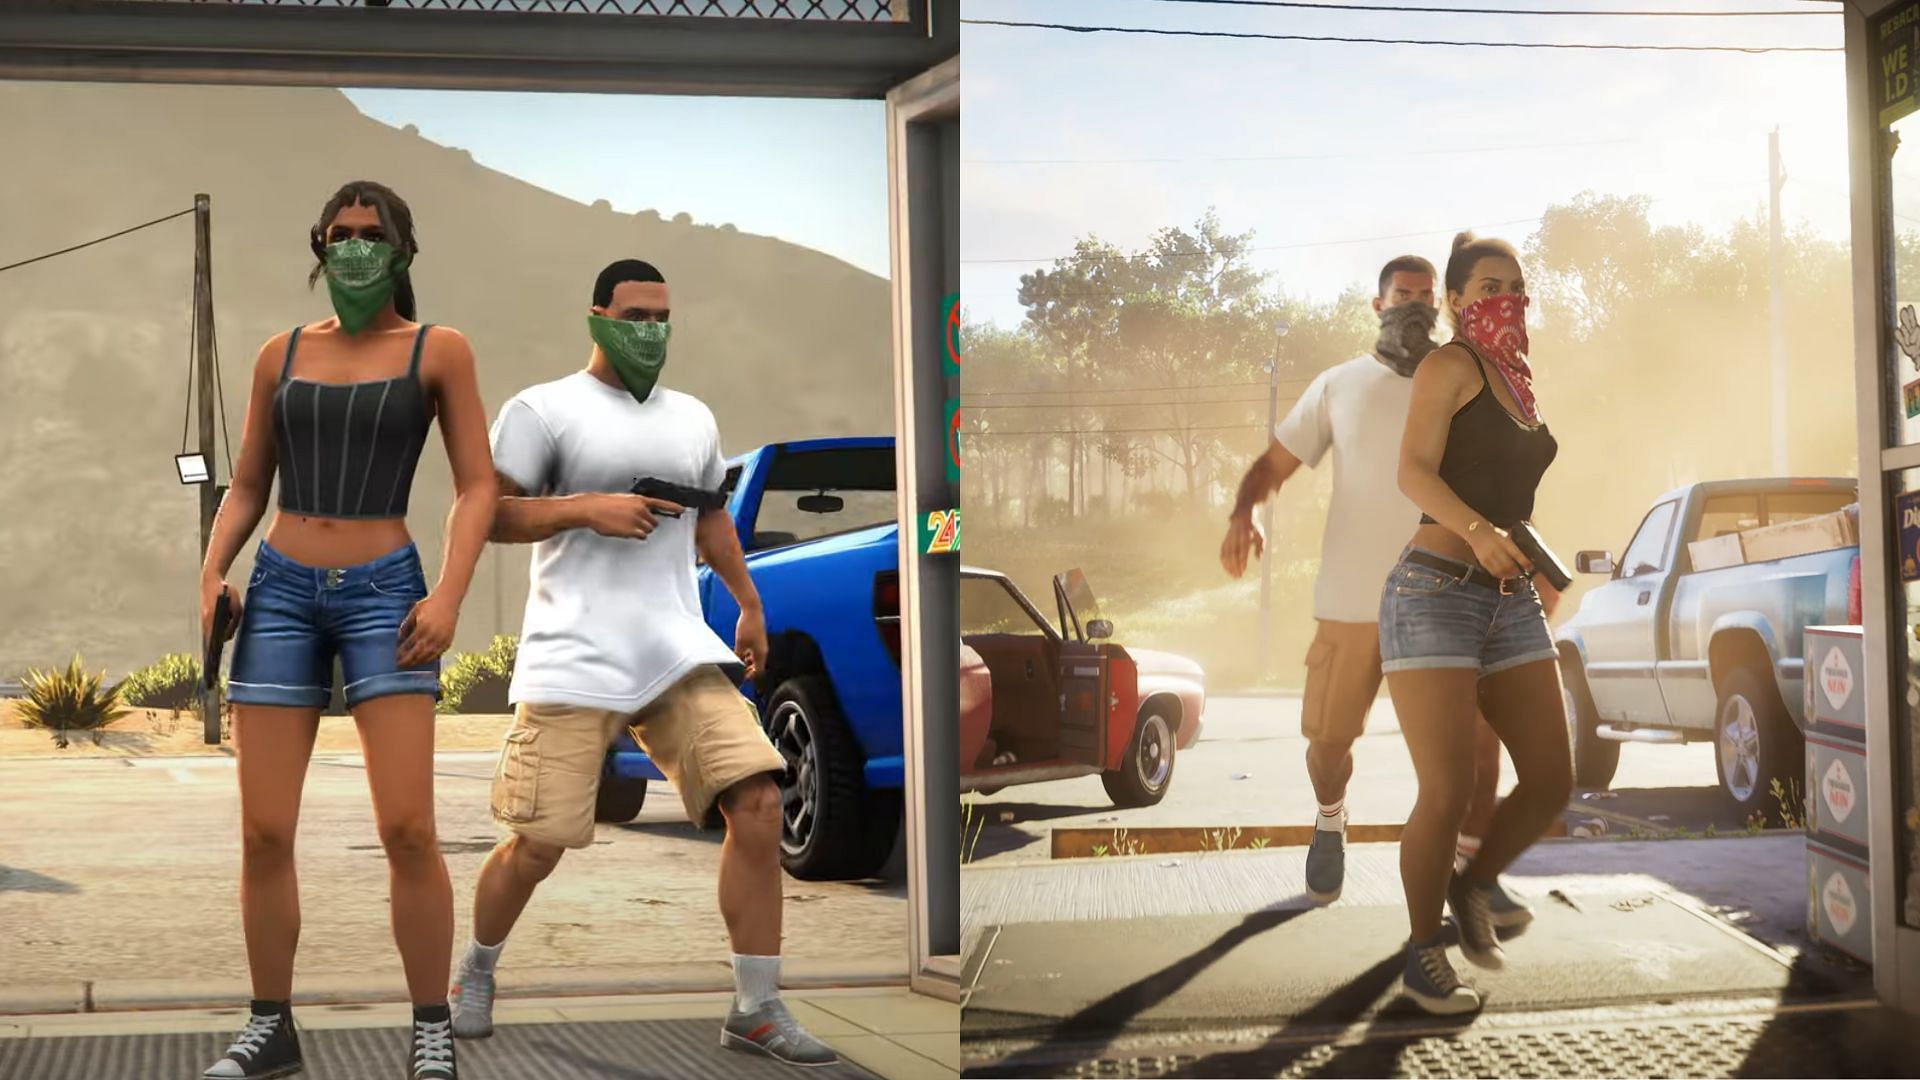 Comparison between the modded Grand Theft Auto 6 trailer and the original one (5/5) (Images via YouTube/@RavenwestR1, Rockstar Games)